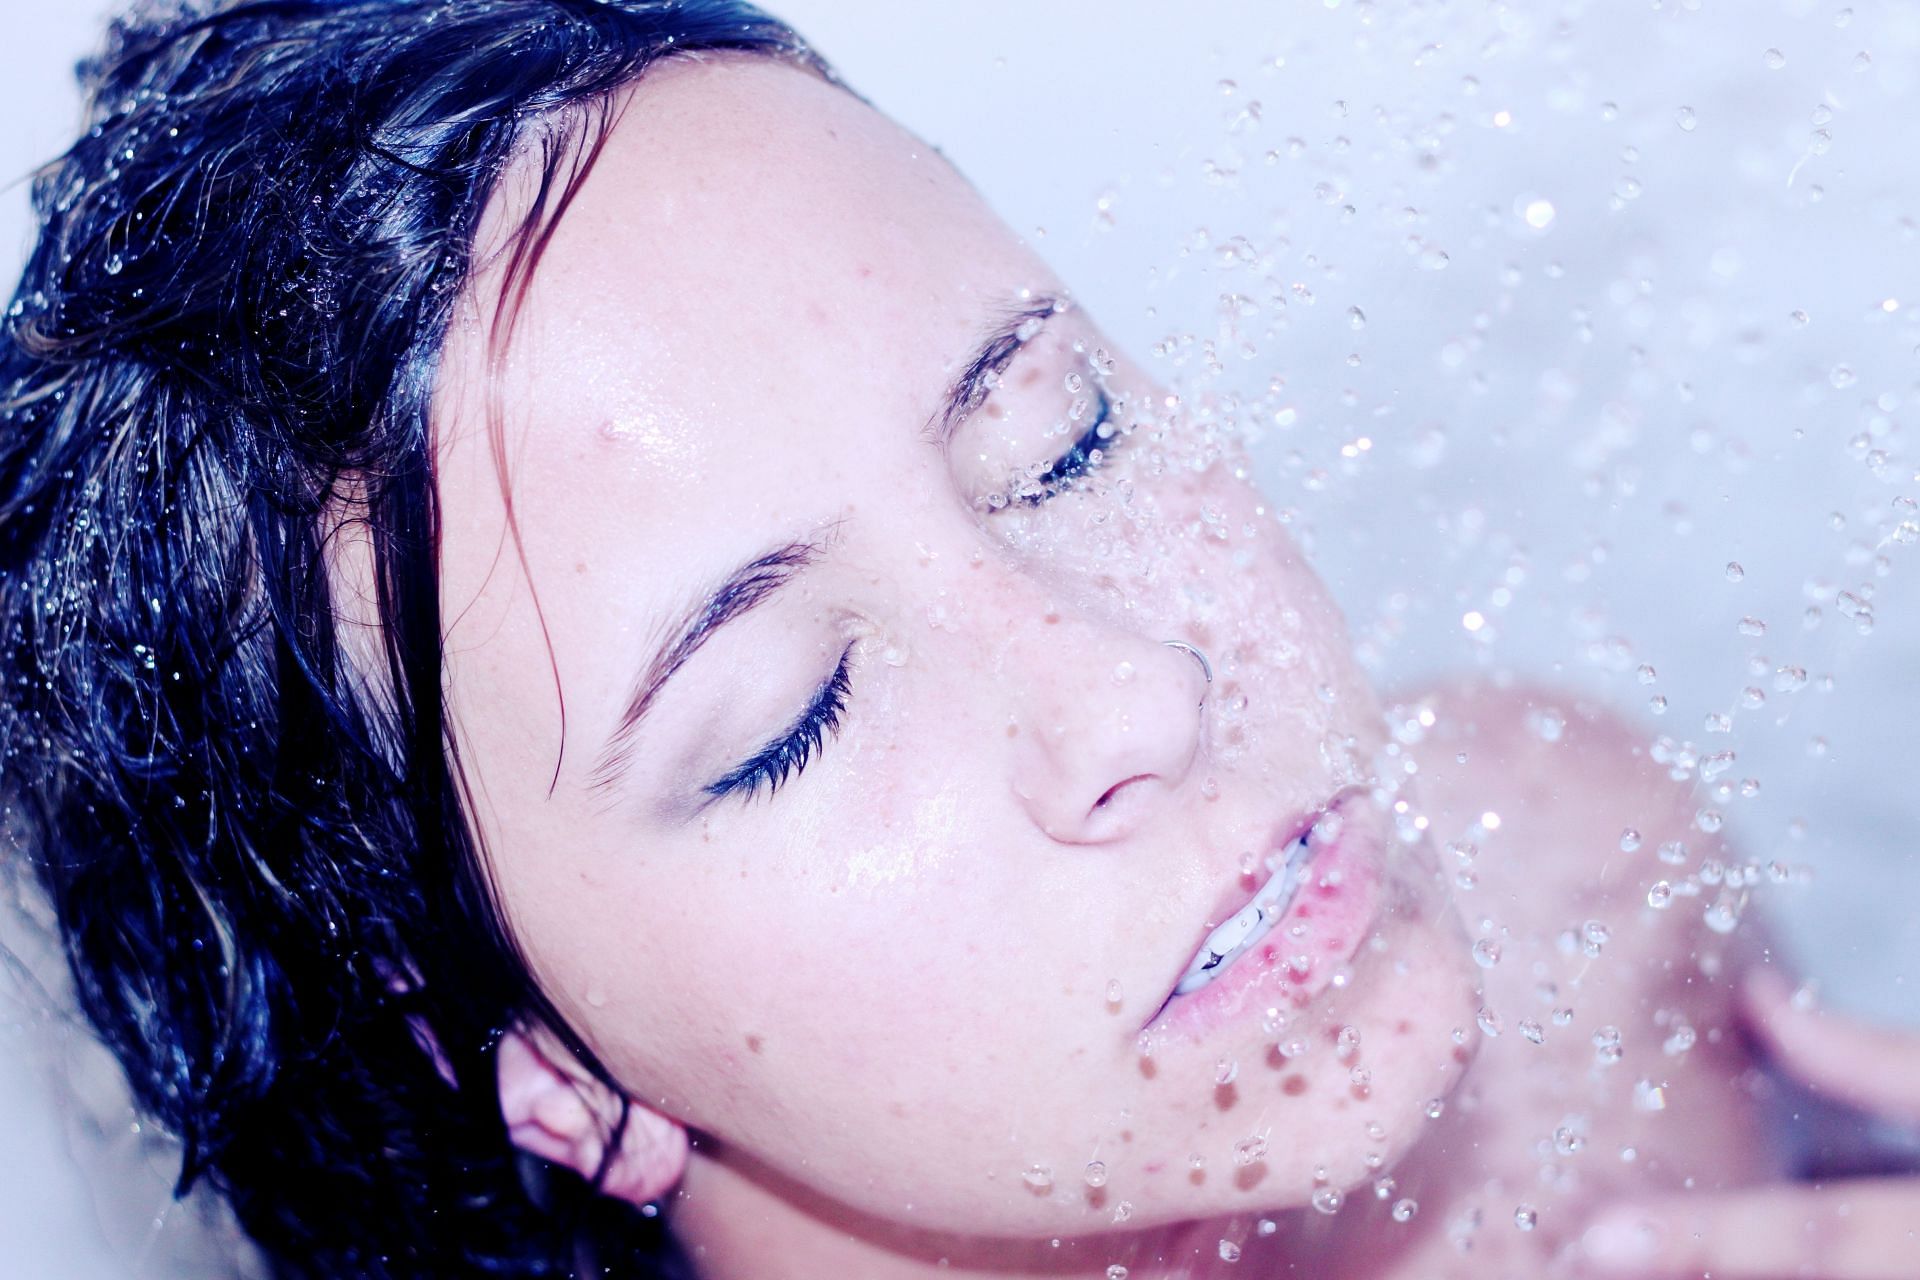 Cleanser helps in removing dirt and makeup off your skin. (Image via Pexels/Leah Kelley)